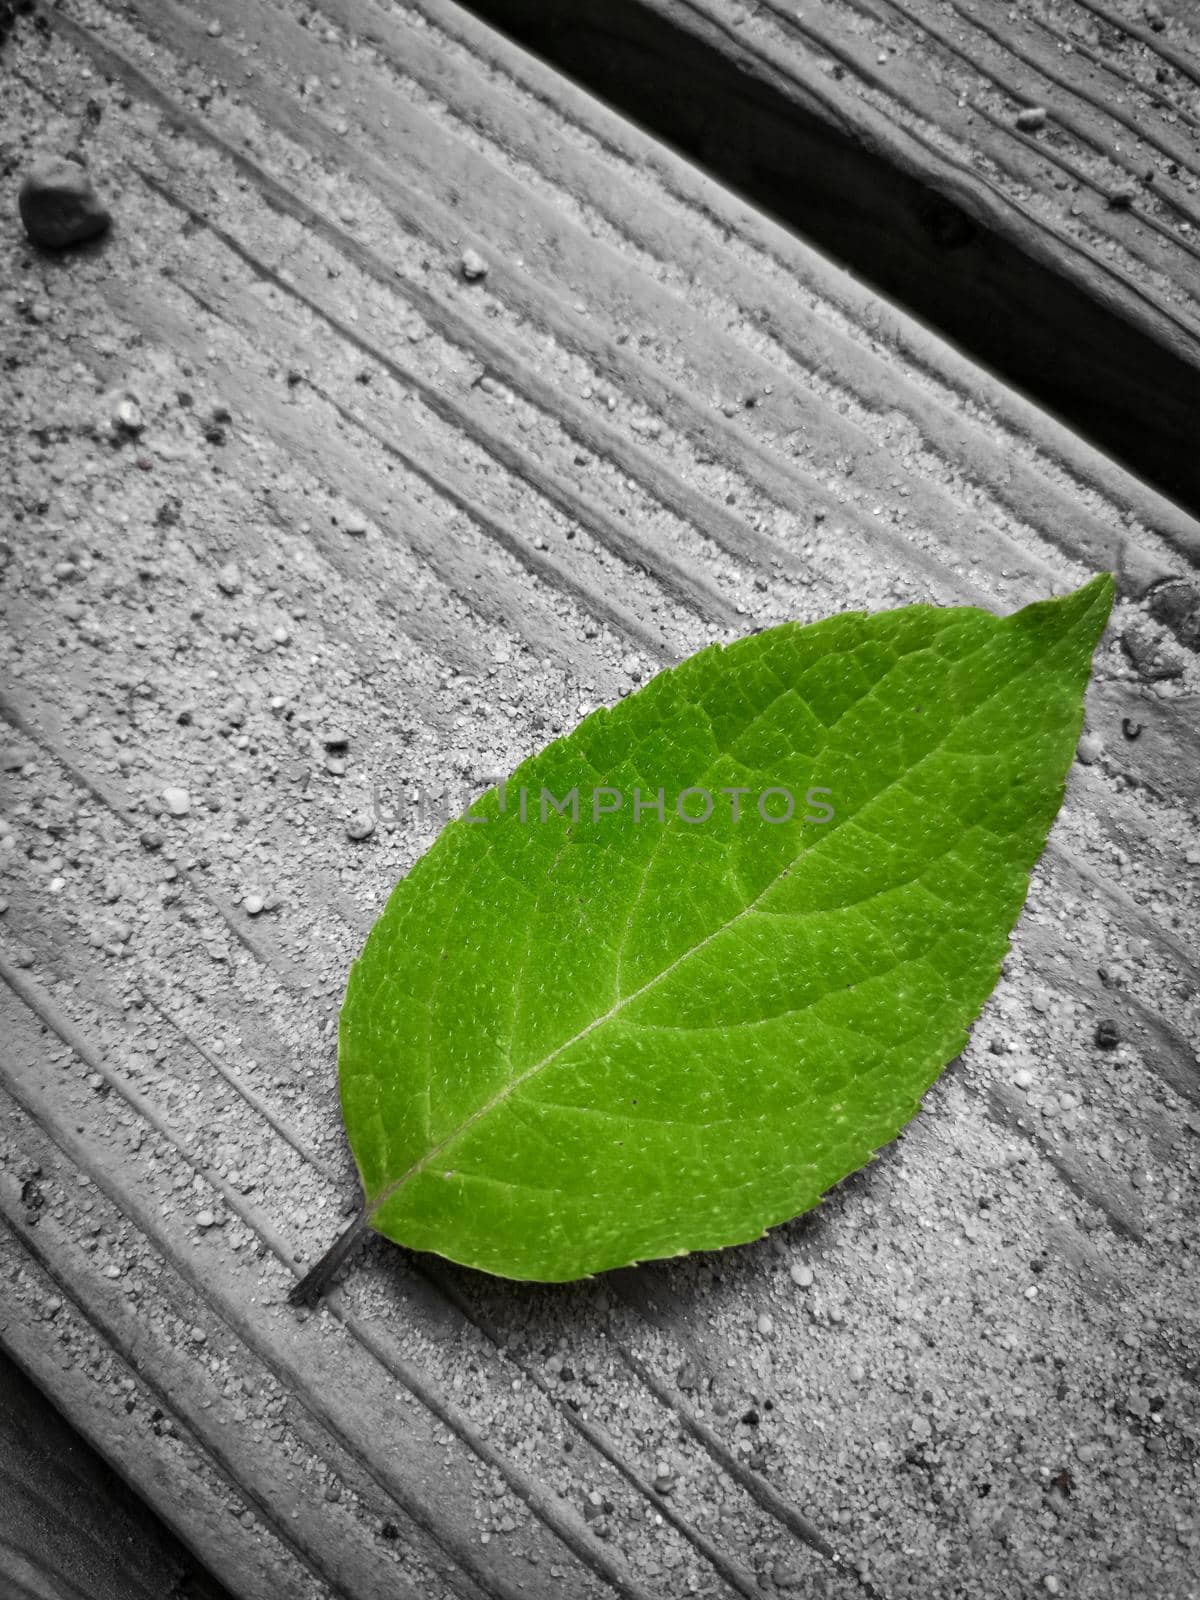 Top view of a green leaf on a gray background - loneliness concept by wektorygrafika